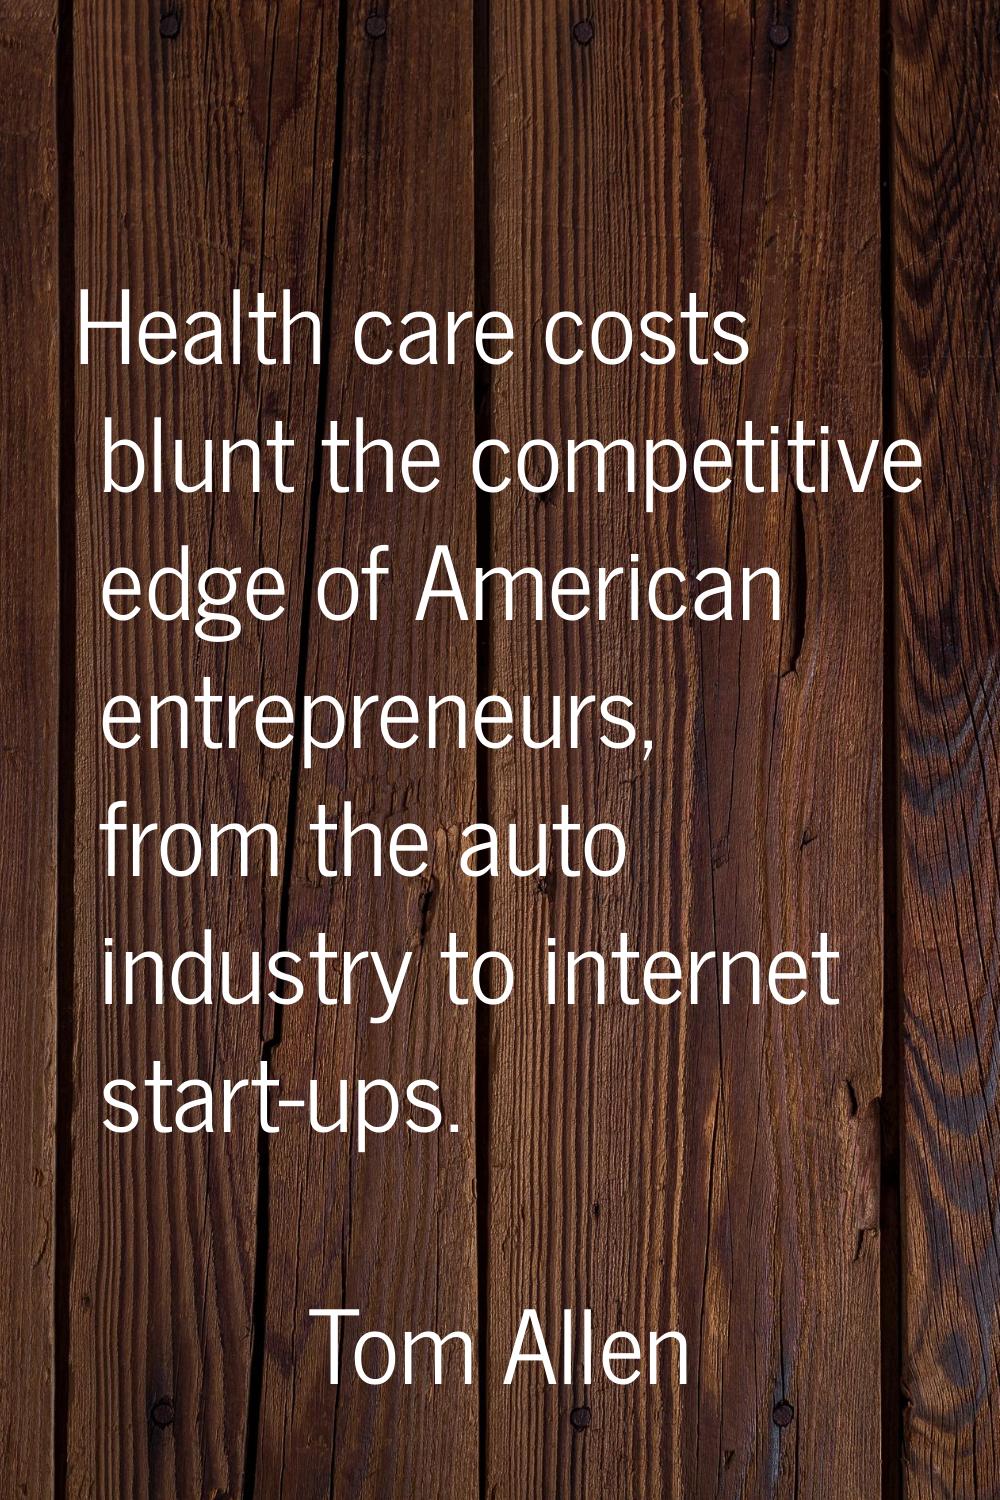 Health care costs blunt the competitive edge of American entrepreneurs, from the auto industry to i